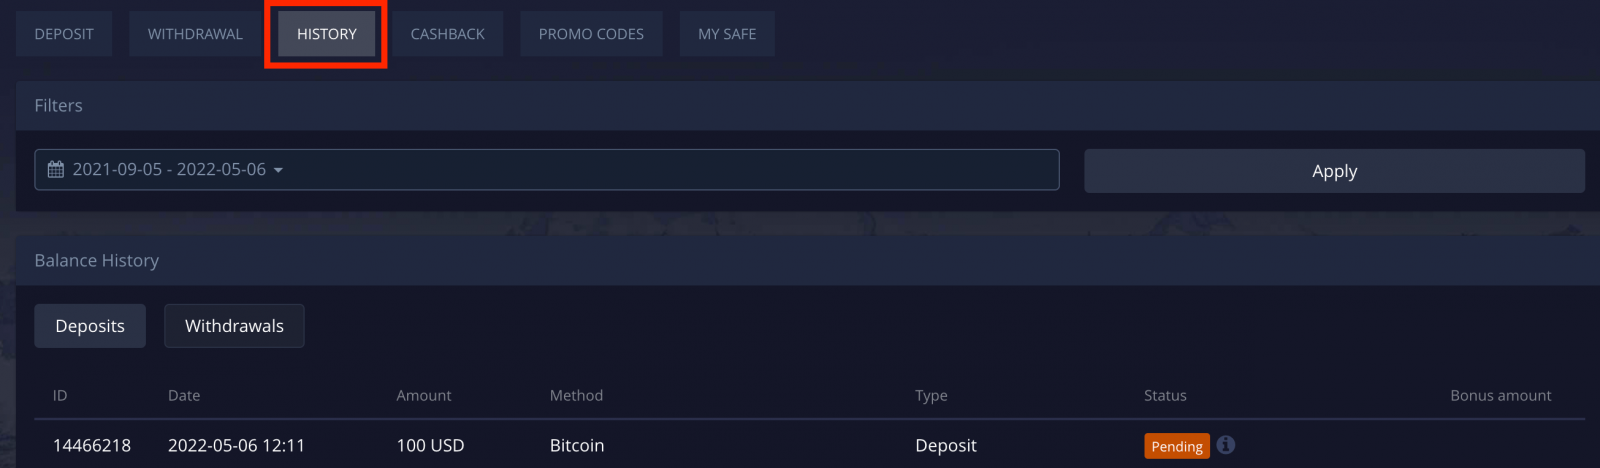 Deposit Money in Pocket Option via Bank Cards (Visa / Mastercard), Bank Transfer, E-payments (OVO, Doku, QRIS, VLoad, WebMoney, Jeton, Perfect Money, FasaPay, Advcash) and Cryptocurrency in Indonesia